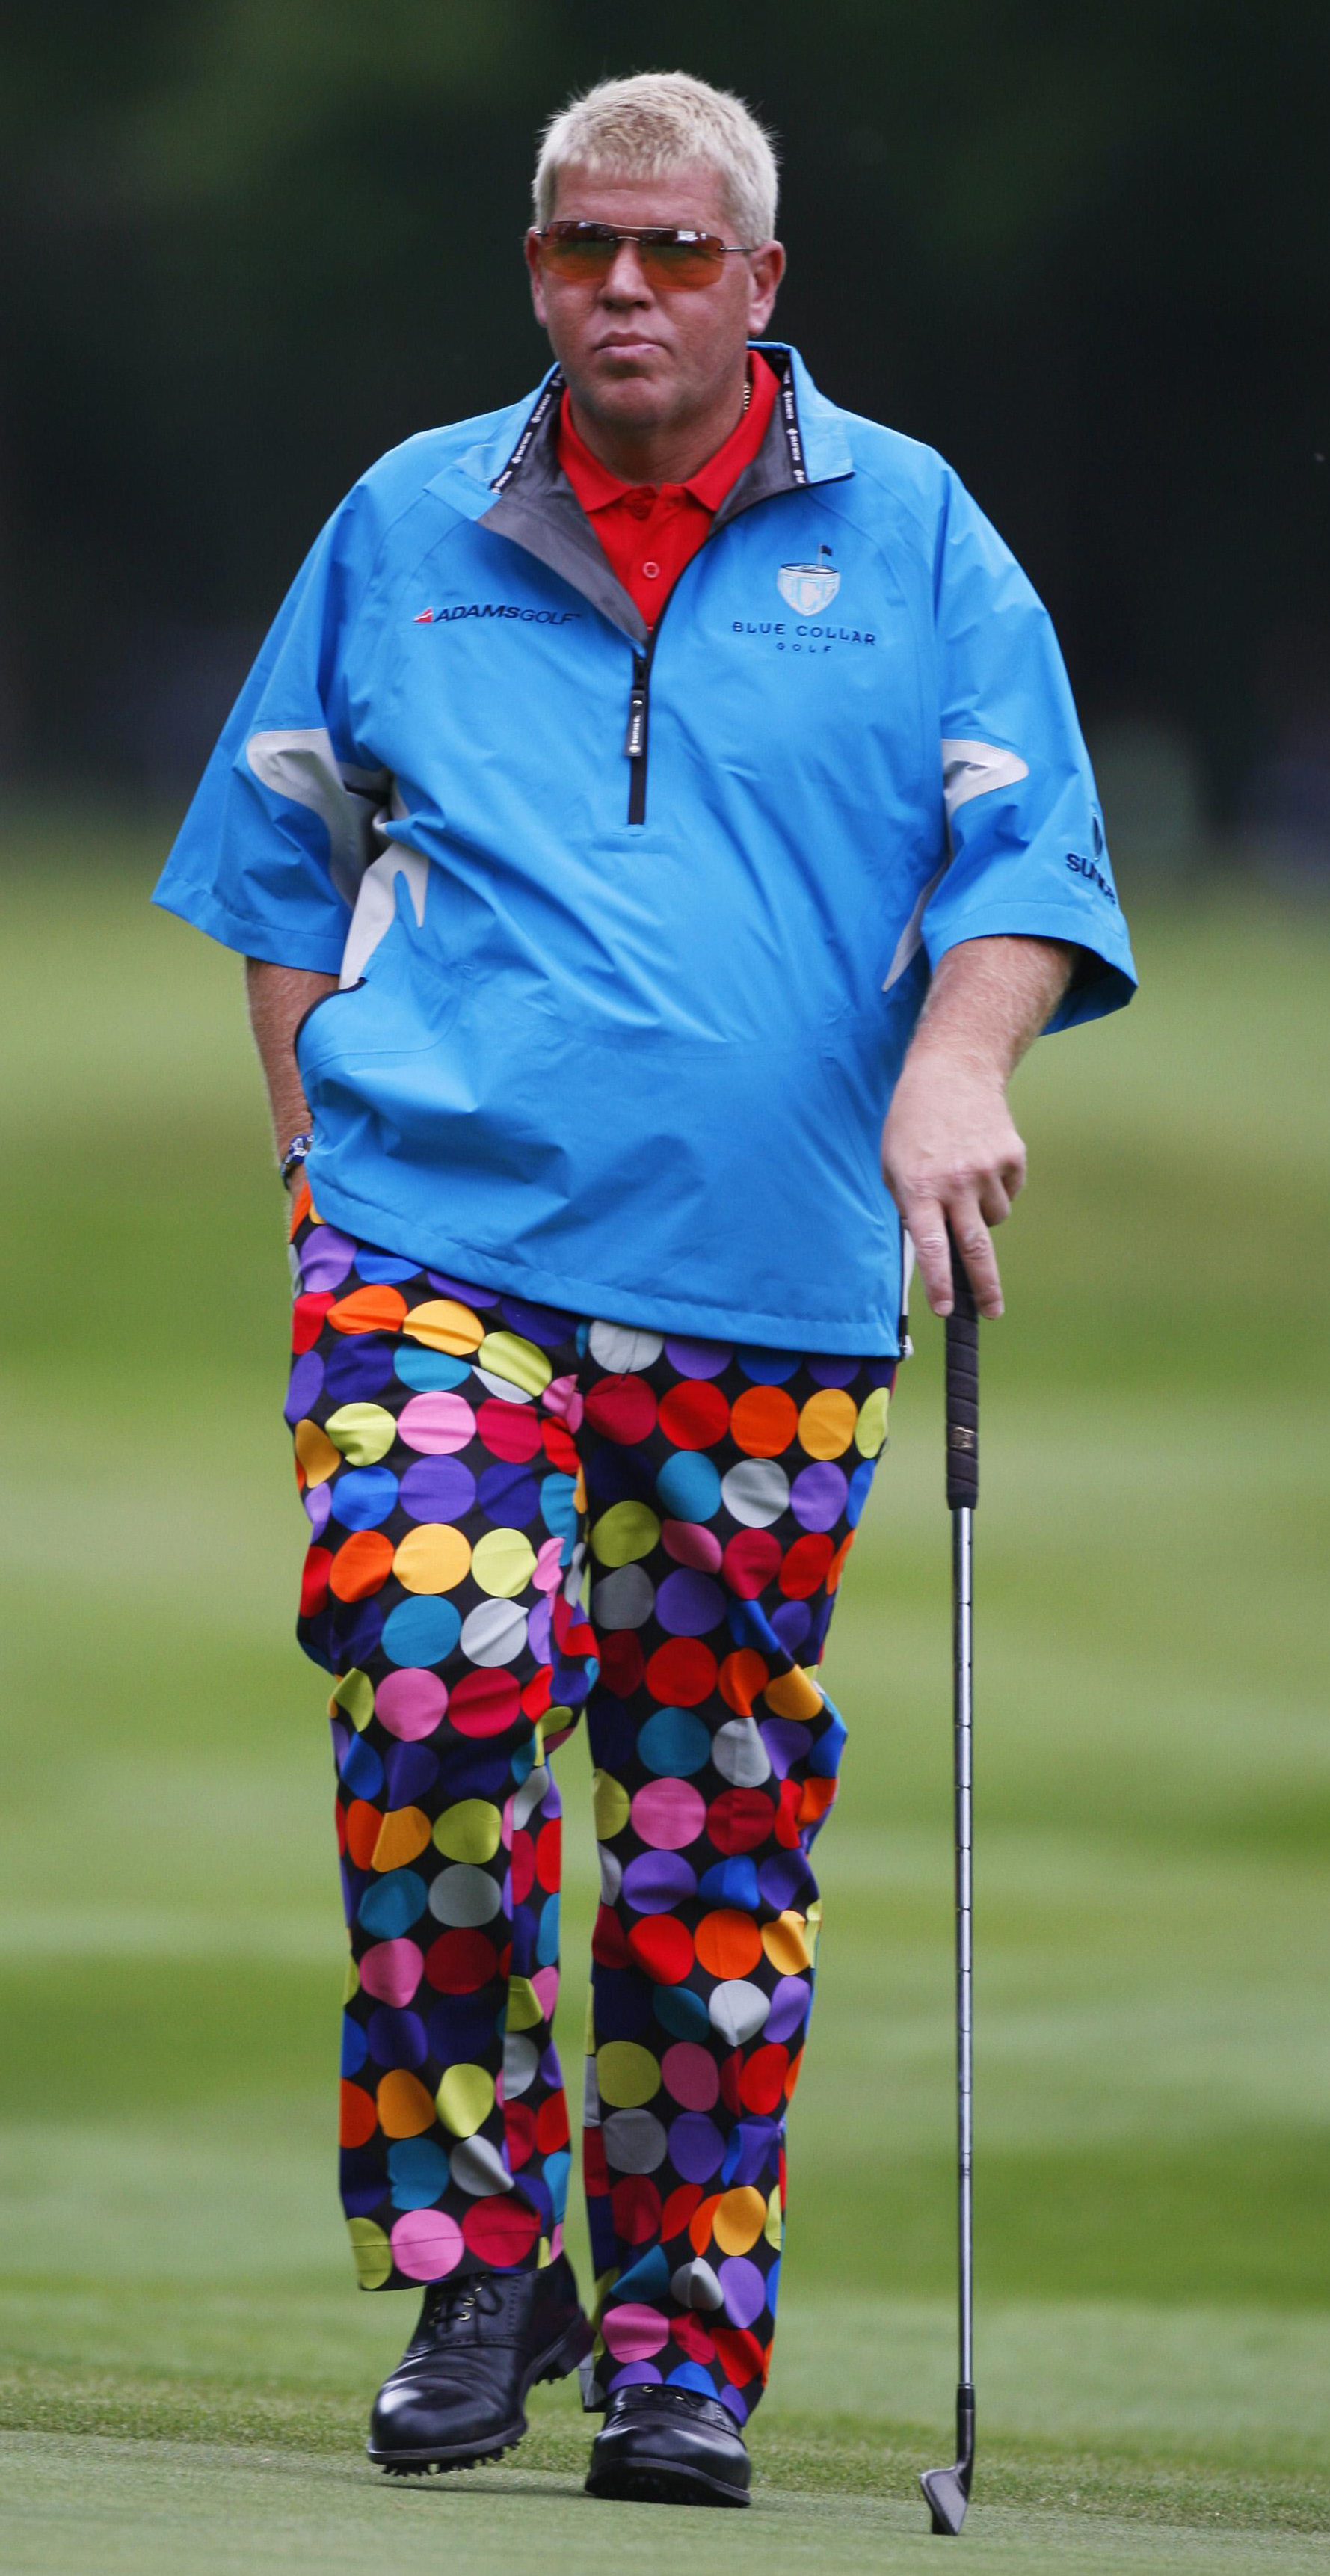 John Daly needs strong finish at Frys.com for tour card – The